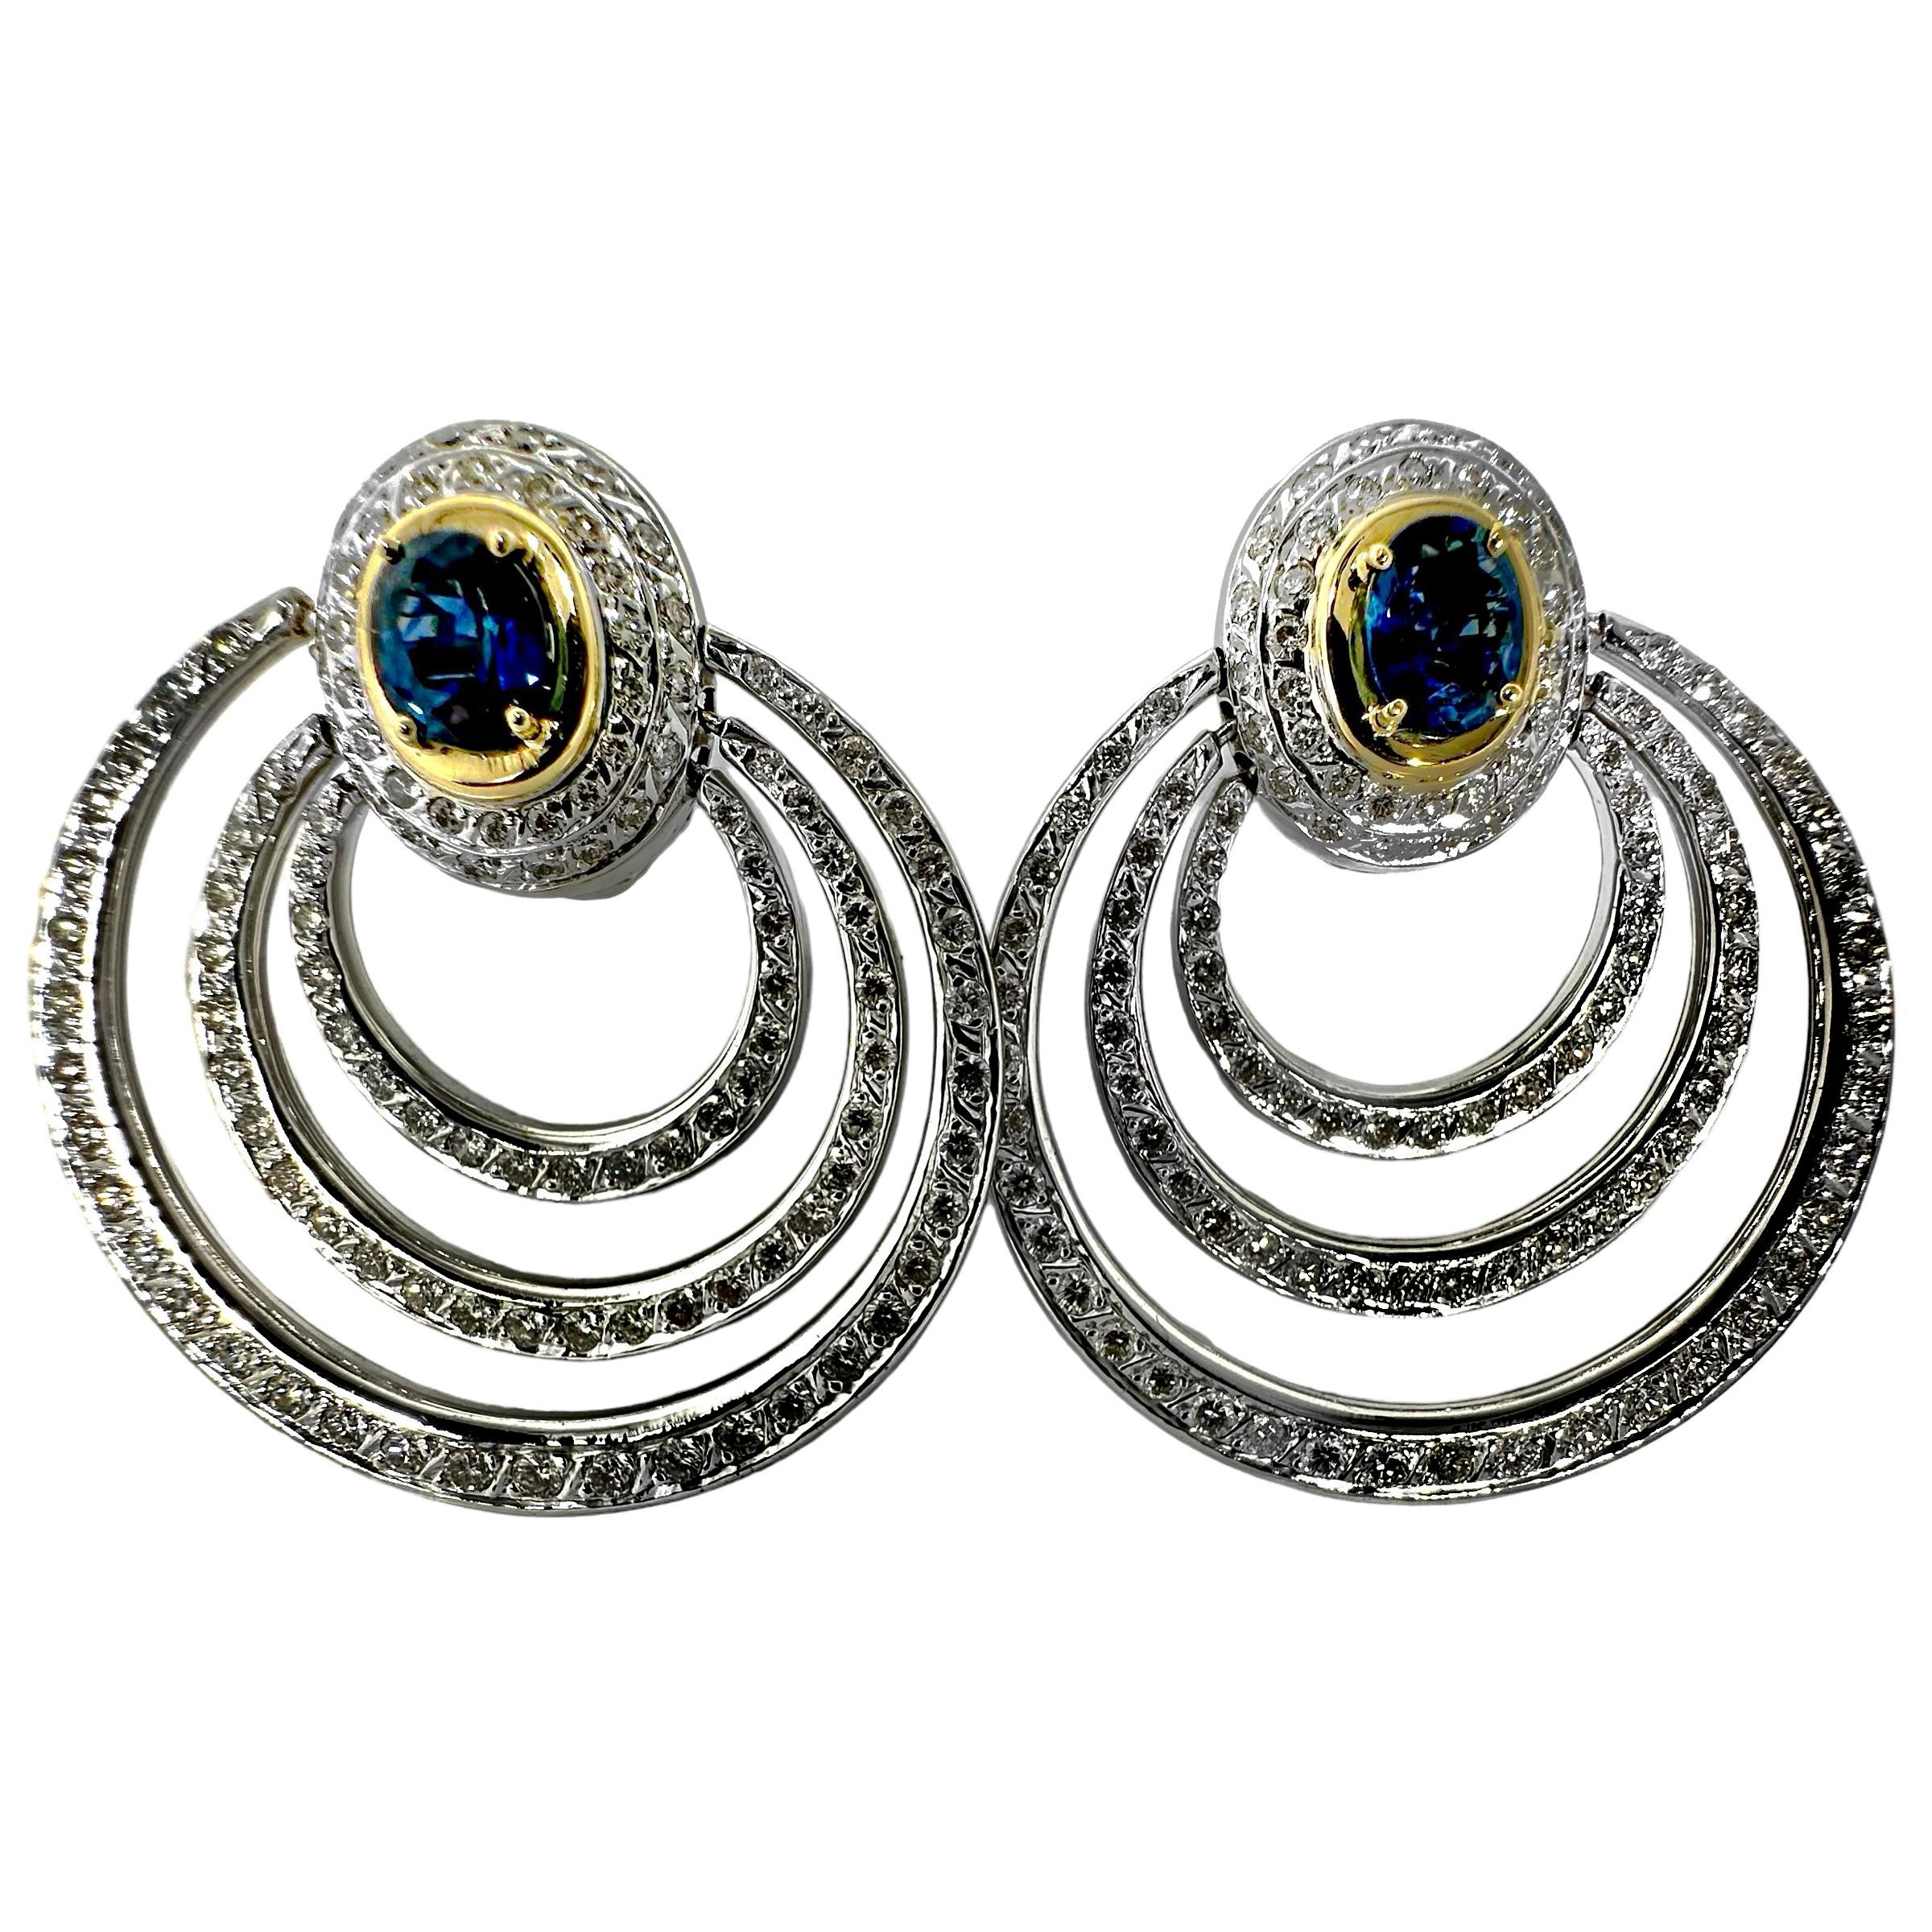 This outstanding pair of precision crafted and very dramatic Repossi Italian hoop earrings is set with in excess of two hundred brilliant cut diamonds and two oval faceted rich blue natural sapphires. Total approximate diamond weight is 9.00ct of